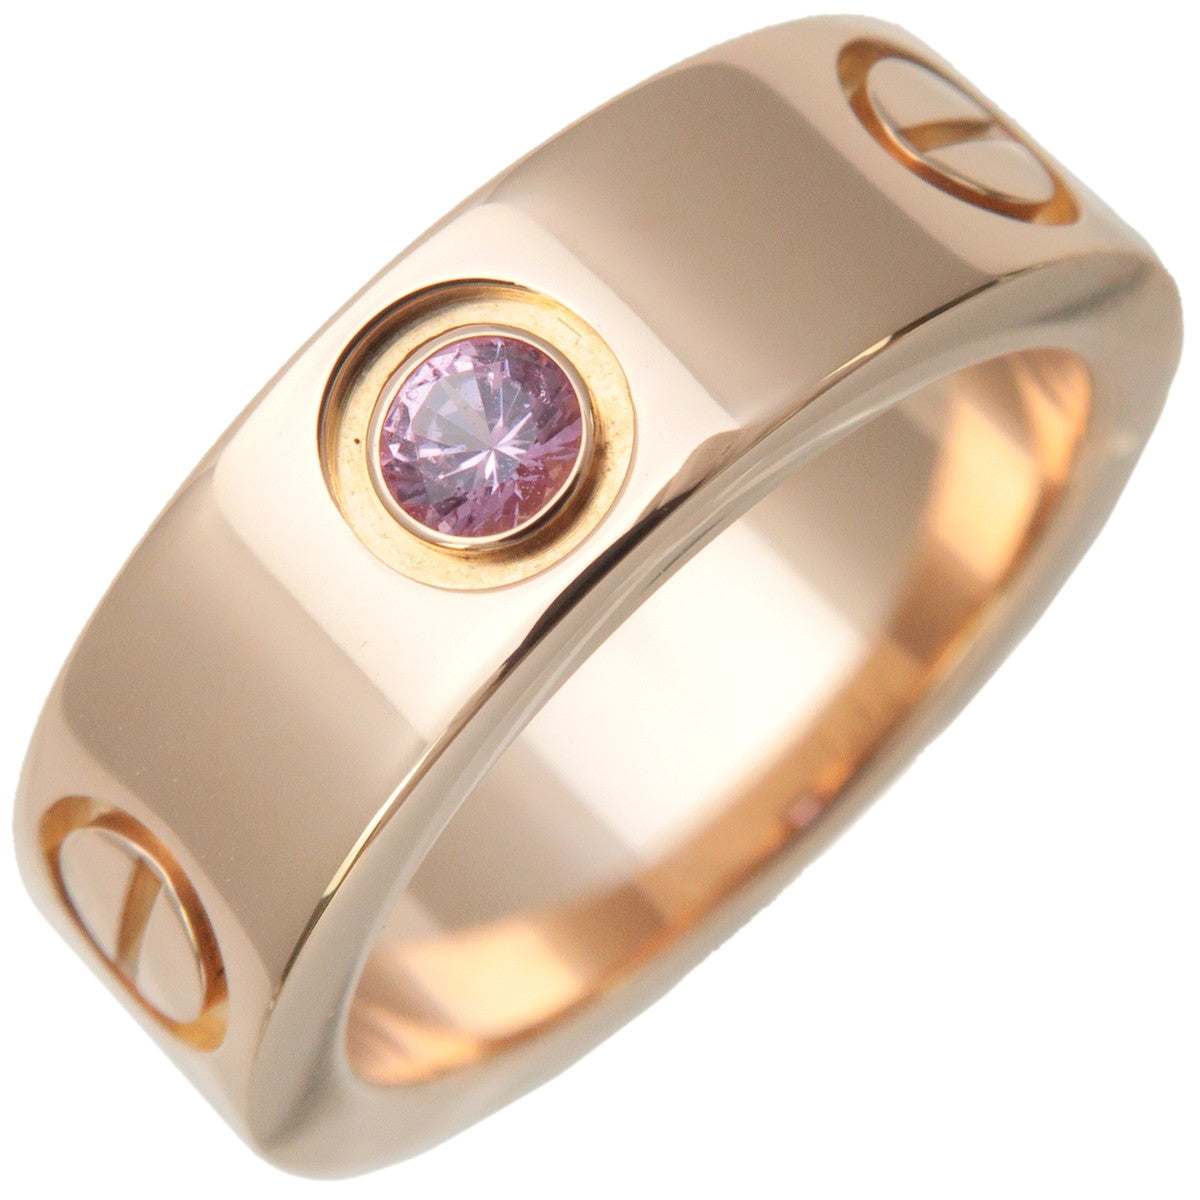 Cartier-Love-Ring-1P-Pink-Sapphire-K18-Rose-Gold-#47-US4-4.5